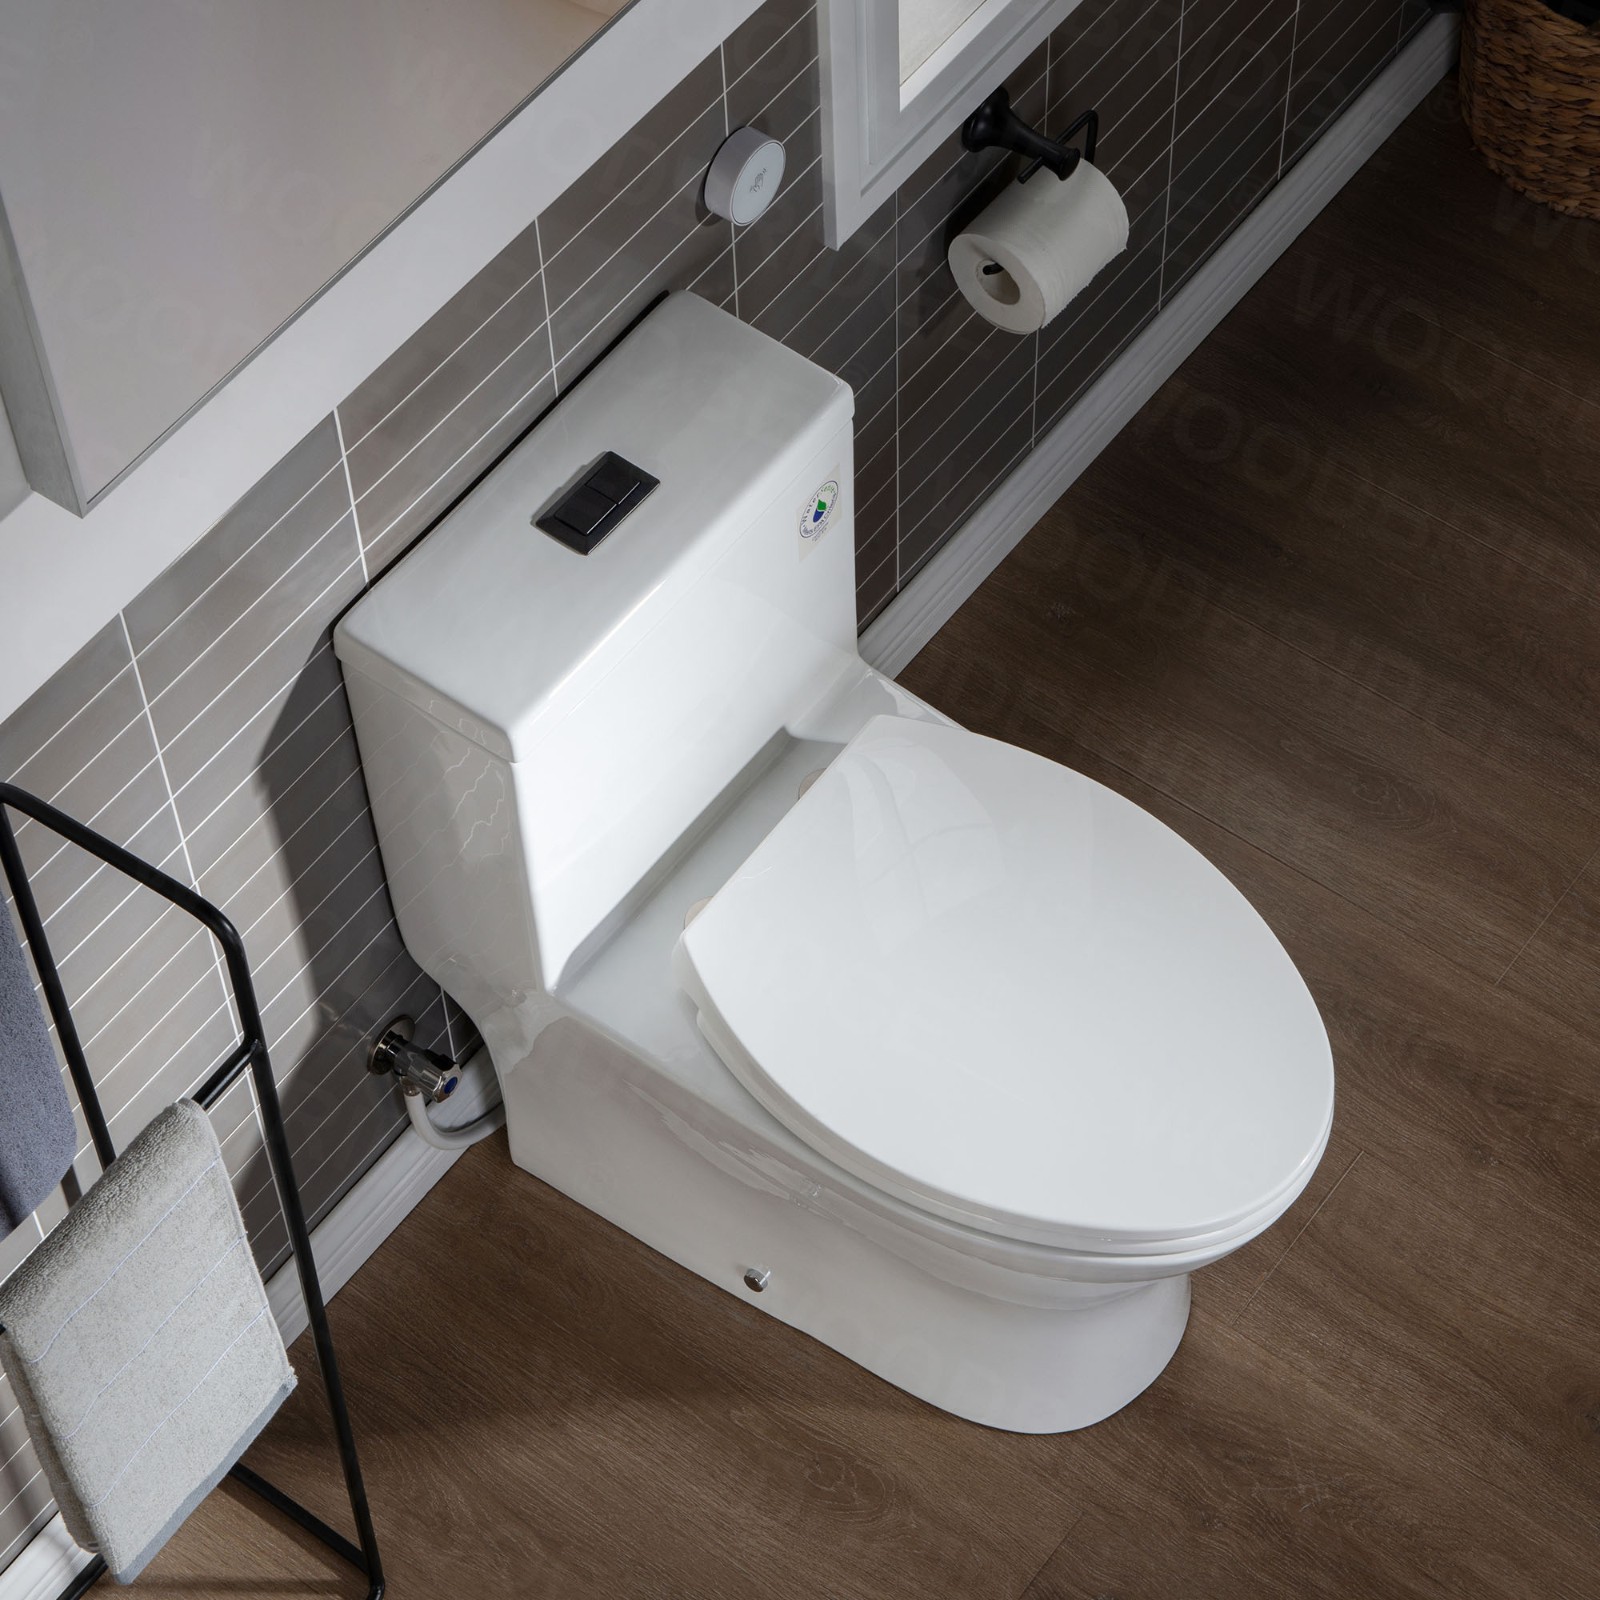  WOODBRIDGE B-0750-A Modern One-Piece Elongated toilet with Solf Closed Seat and Hand Free Touchless Sensor Flush Kit, White_5469